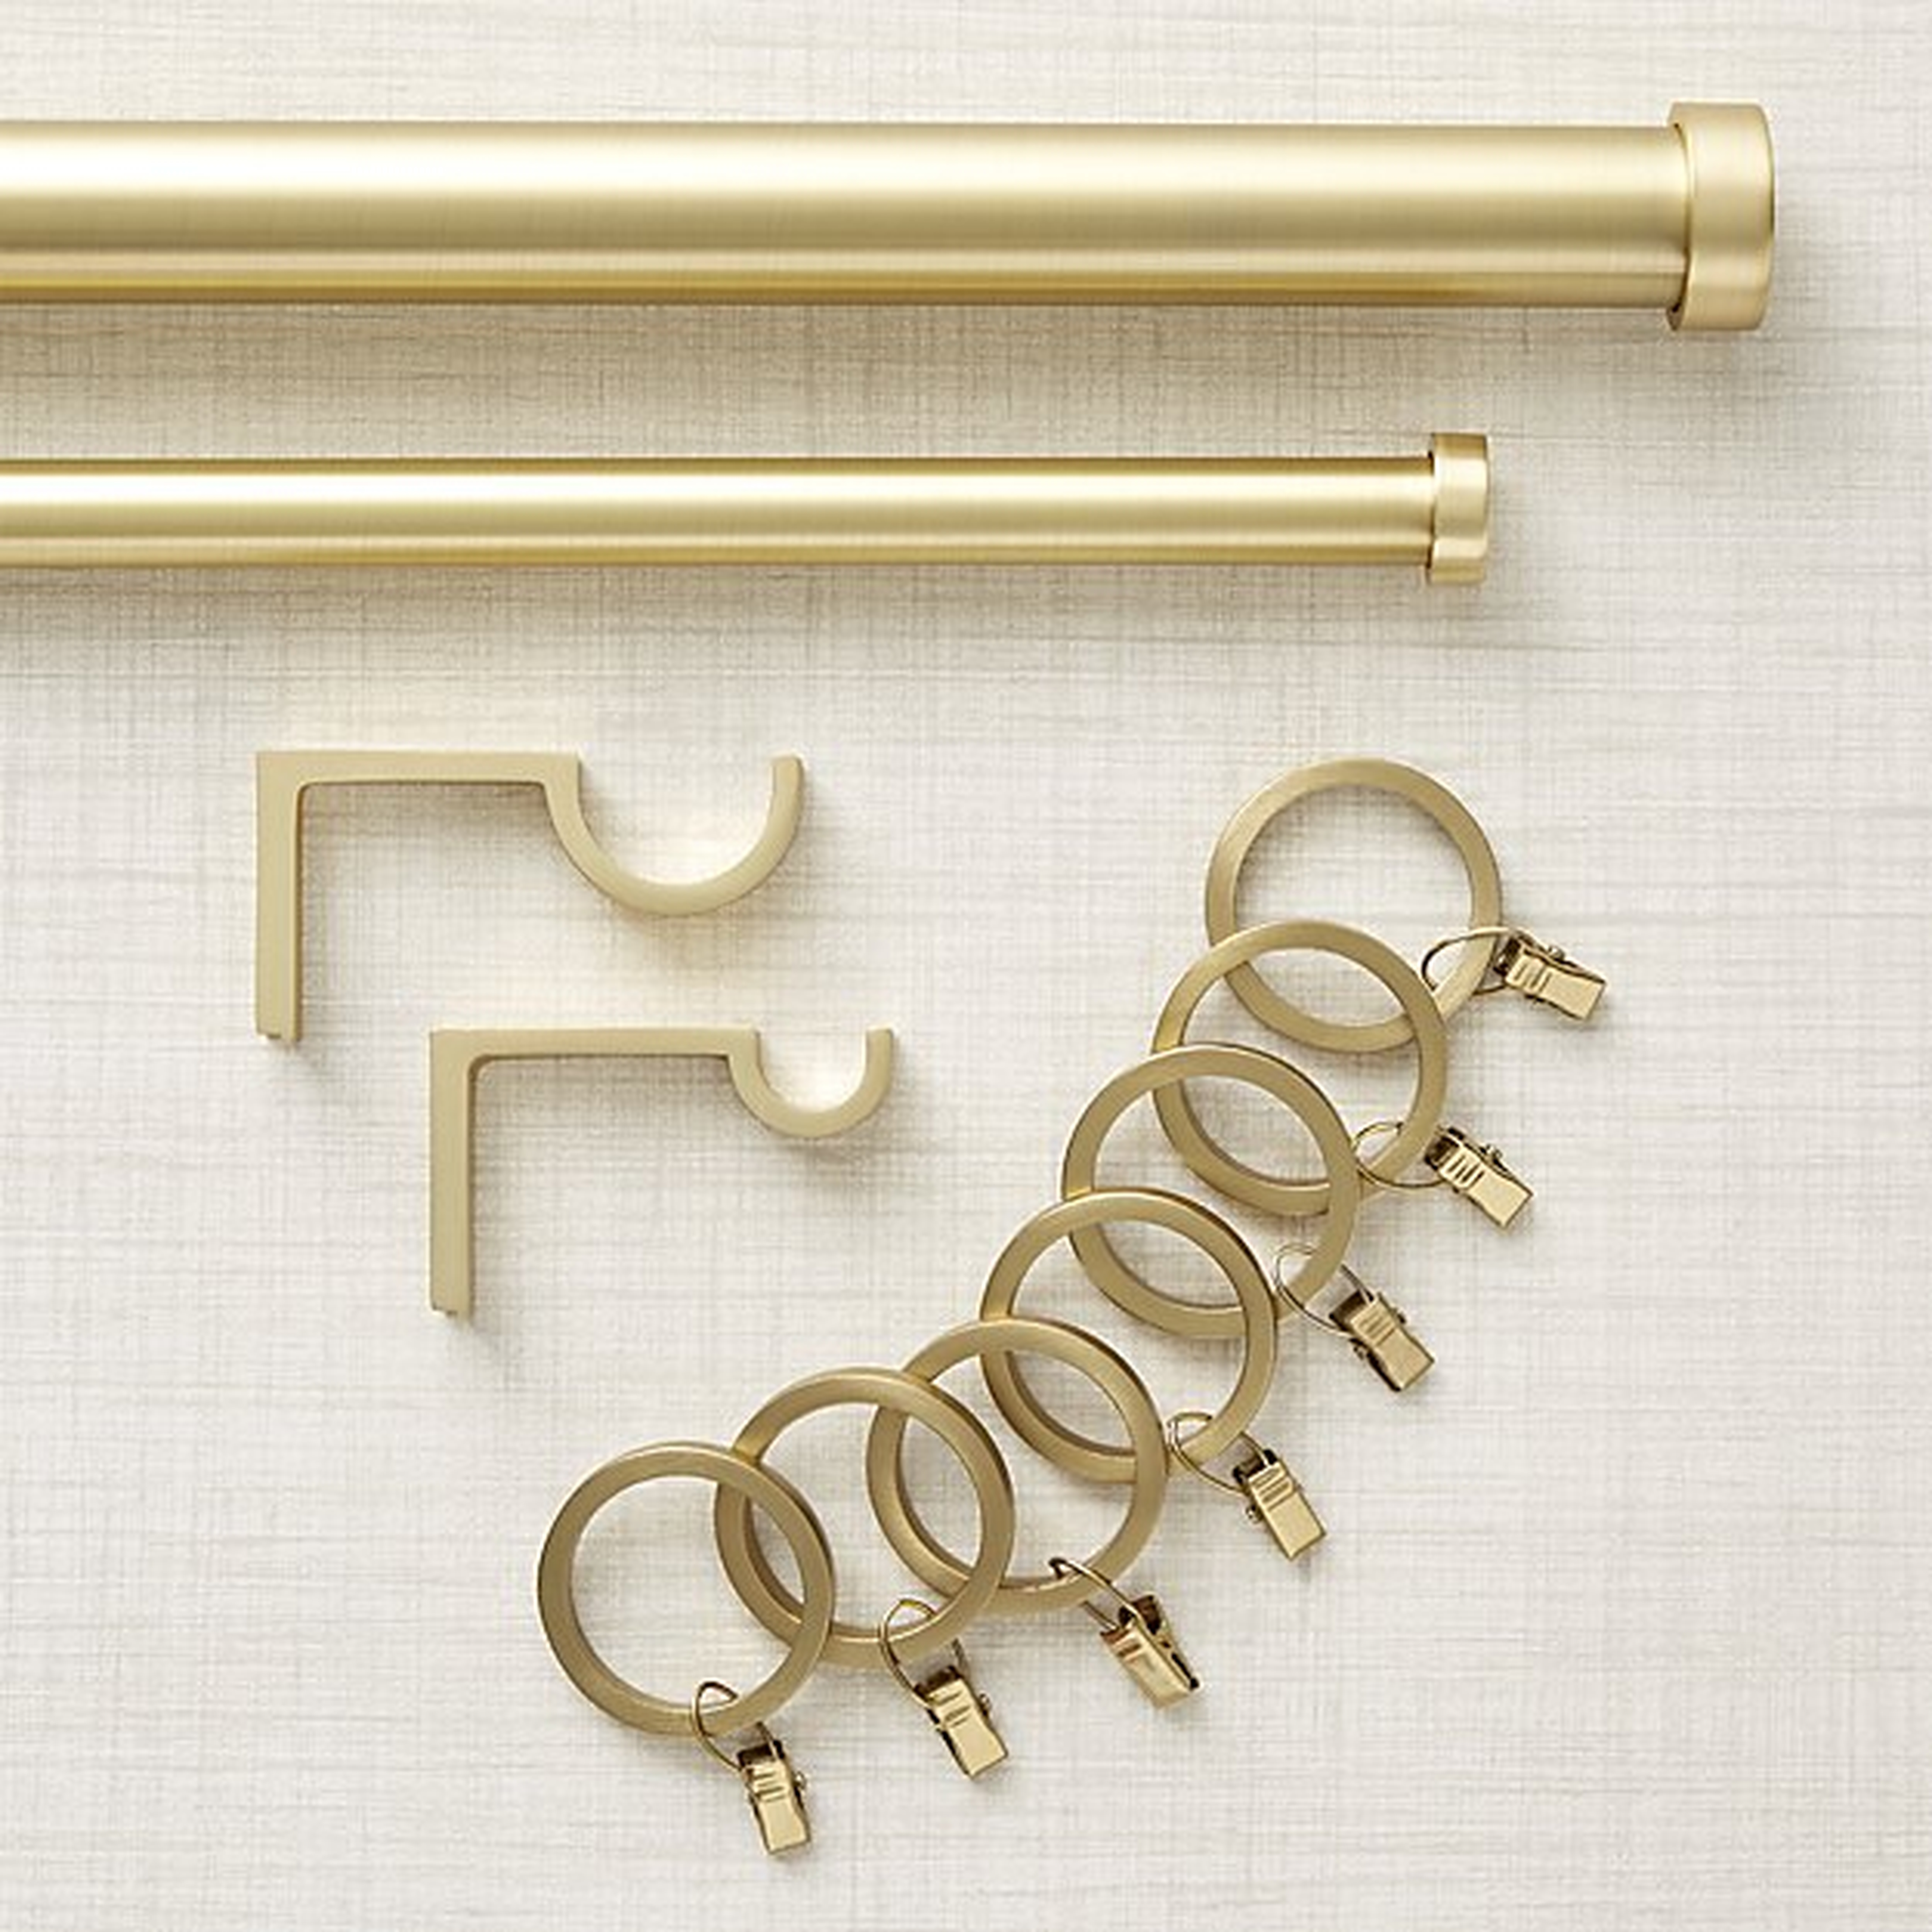 CB Brushed Brass Curtain Hardware - 28" - 48" (1.25") - Crate and Barrel